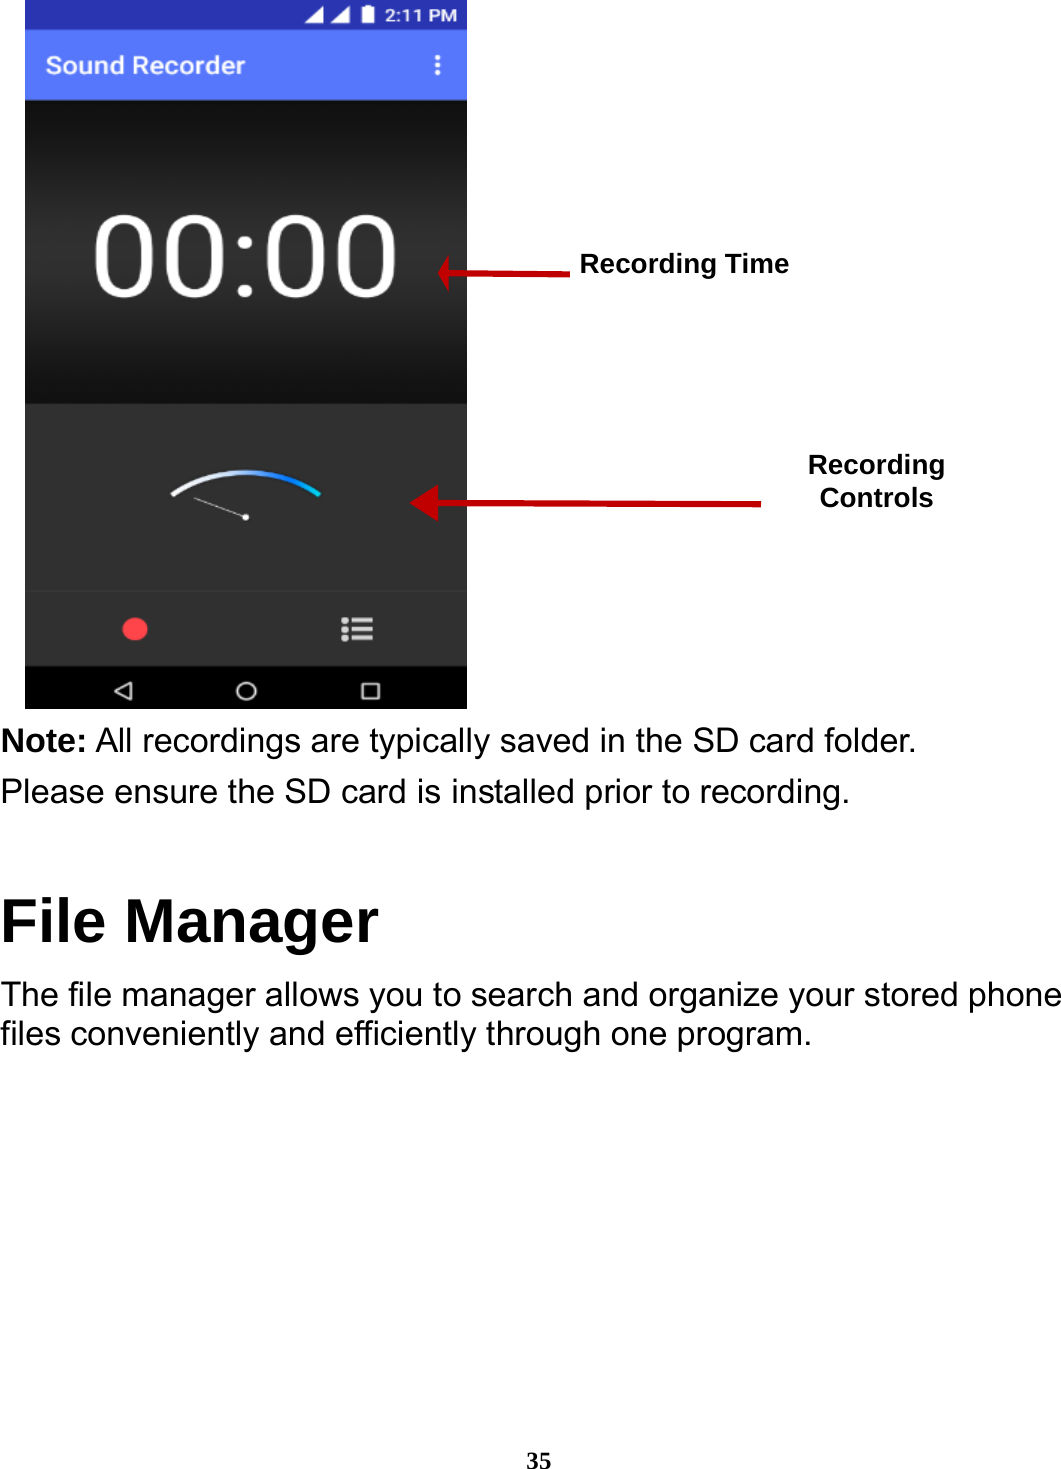  35    Note: All recordings are typically saved in the SD card folder. Please ensure the SD card is installed prior to recording.   File Manager The file manager allows you to search and organize your stored phone files conveniently and efficiently through one program. Recording Controls Recording Time 